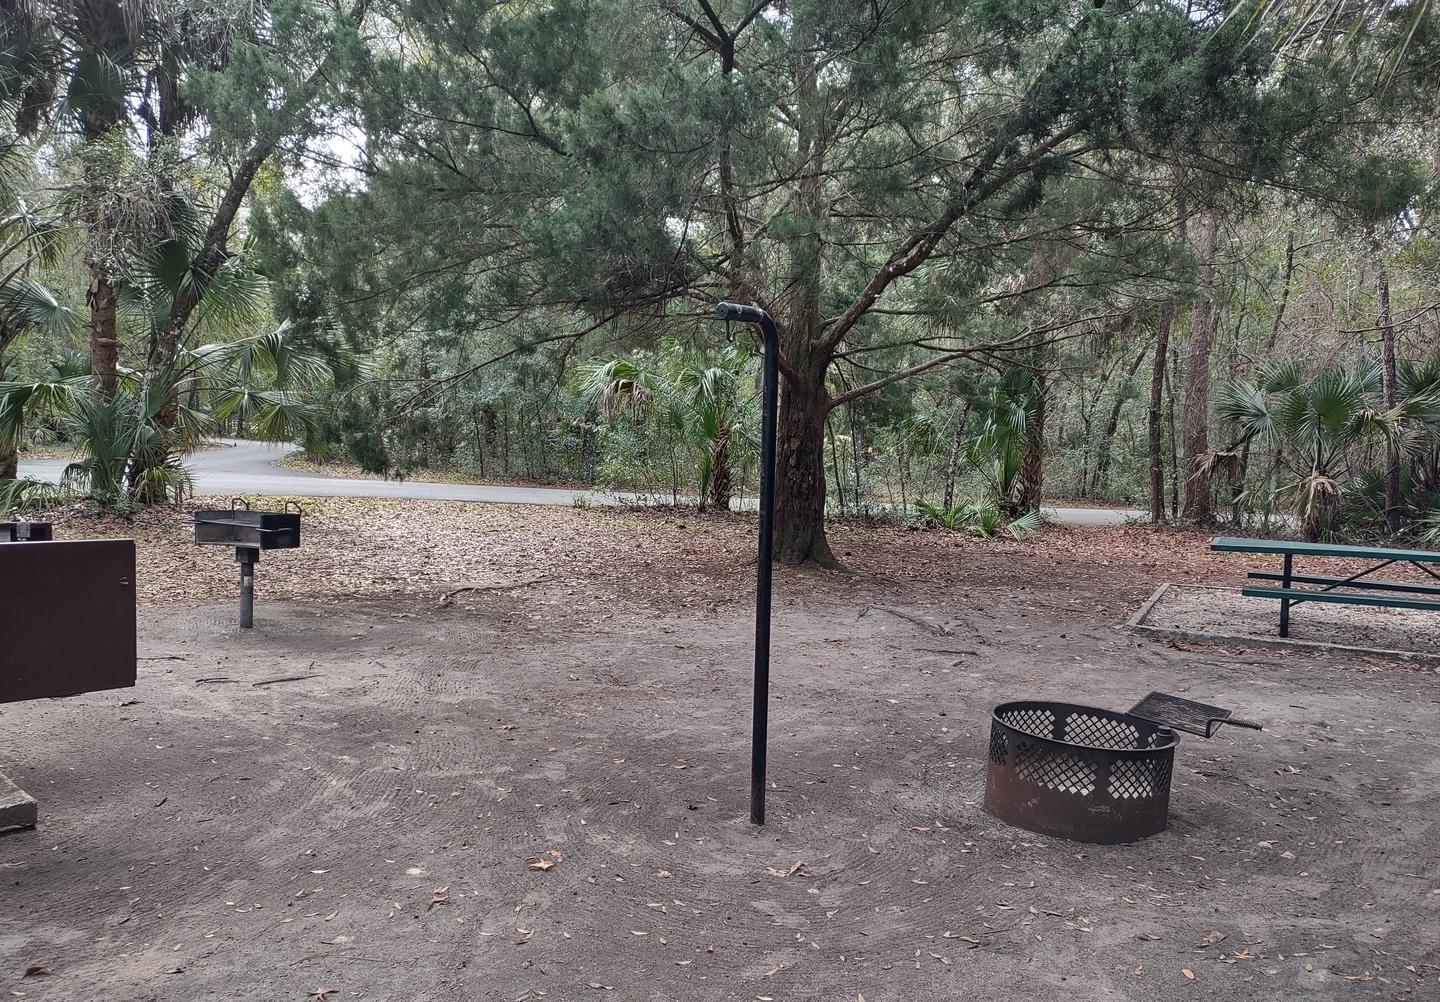 Another view of site 31Amenities: picnic table, light pole, fire ring, grill, bear-proof storage locker